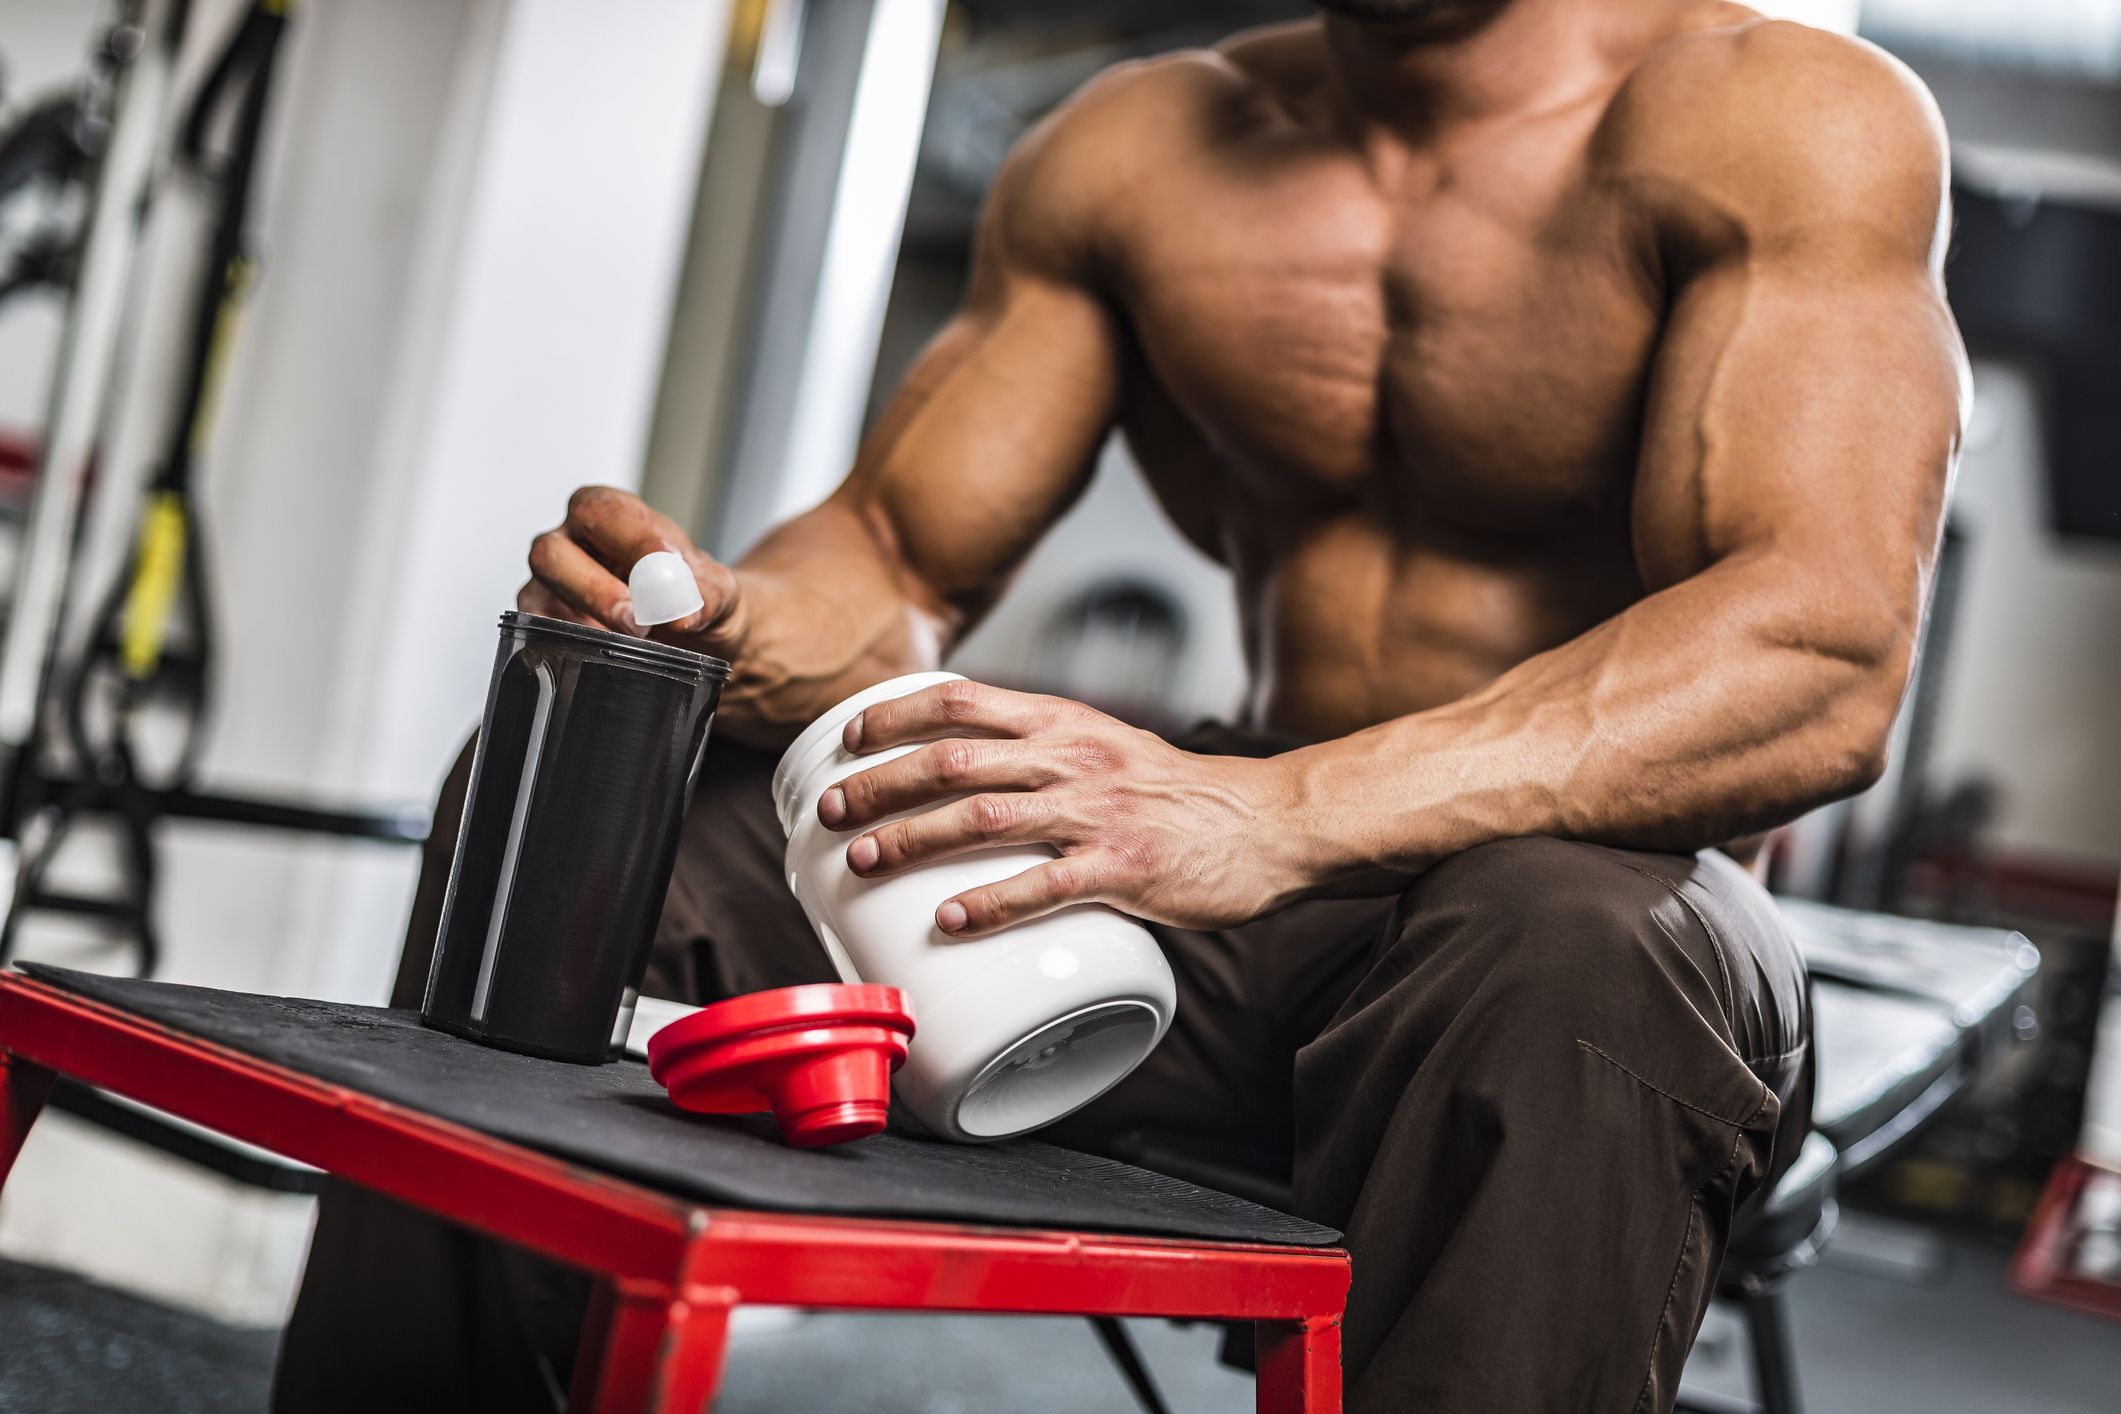 Is creatine an important supplement for mens health?